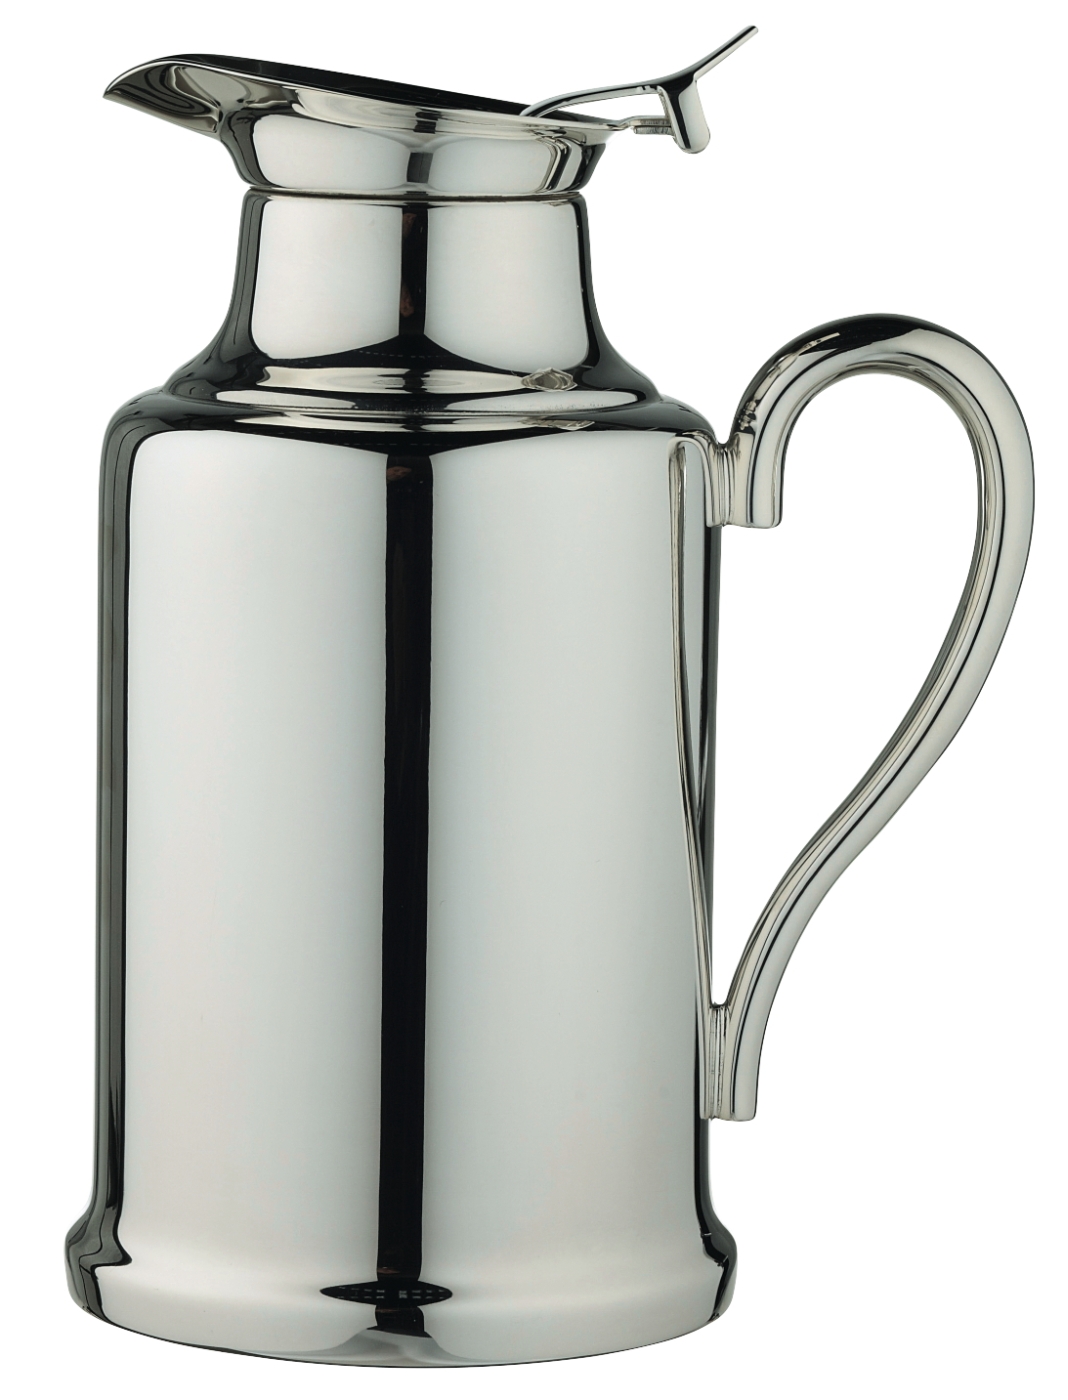 Insulated pot Ercuis Decanters and jugs 6817